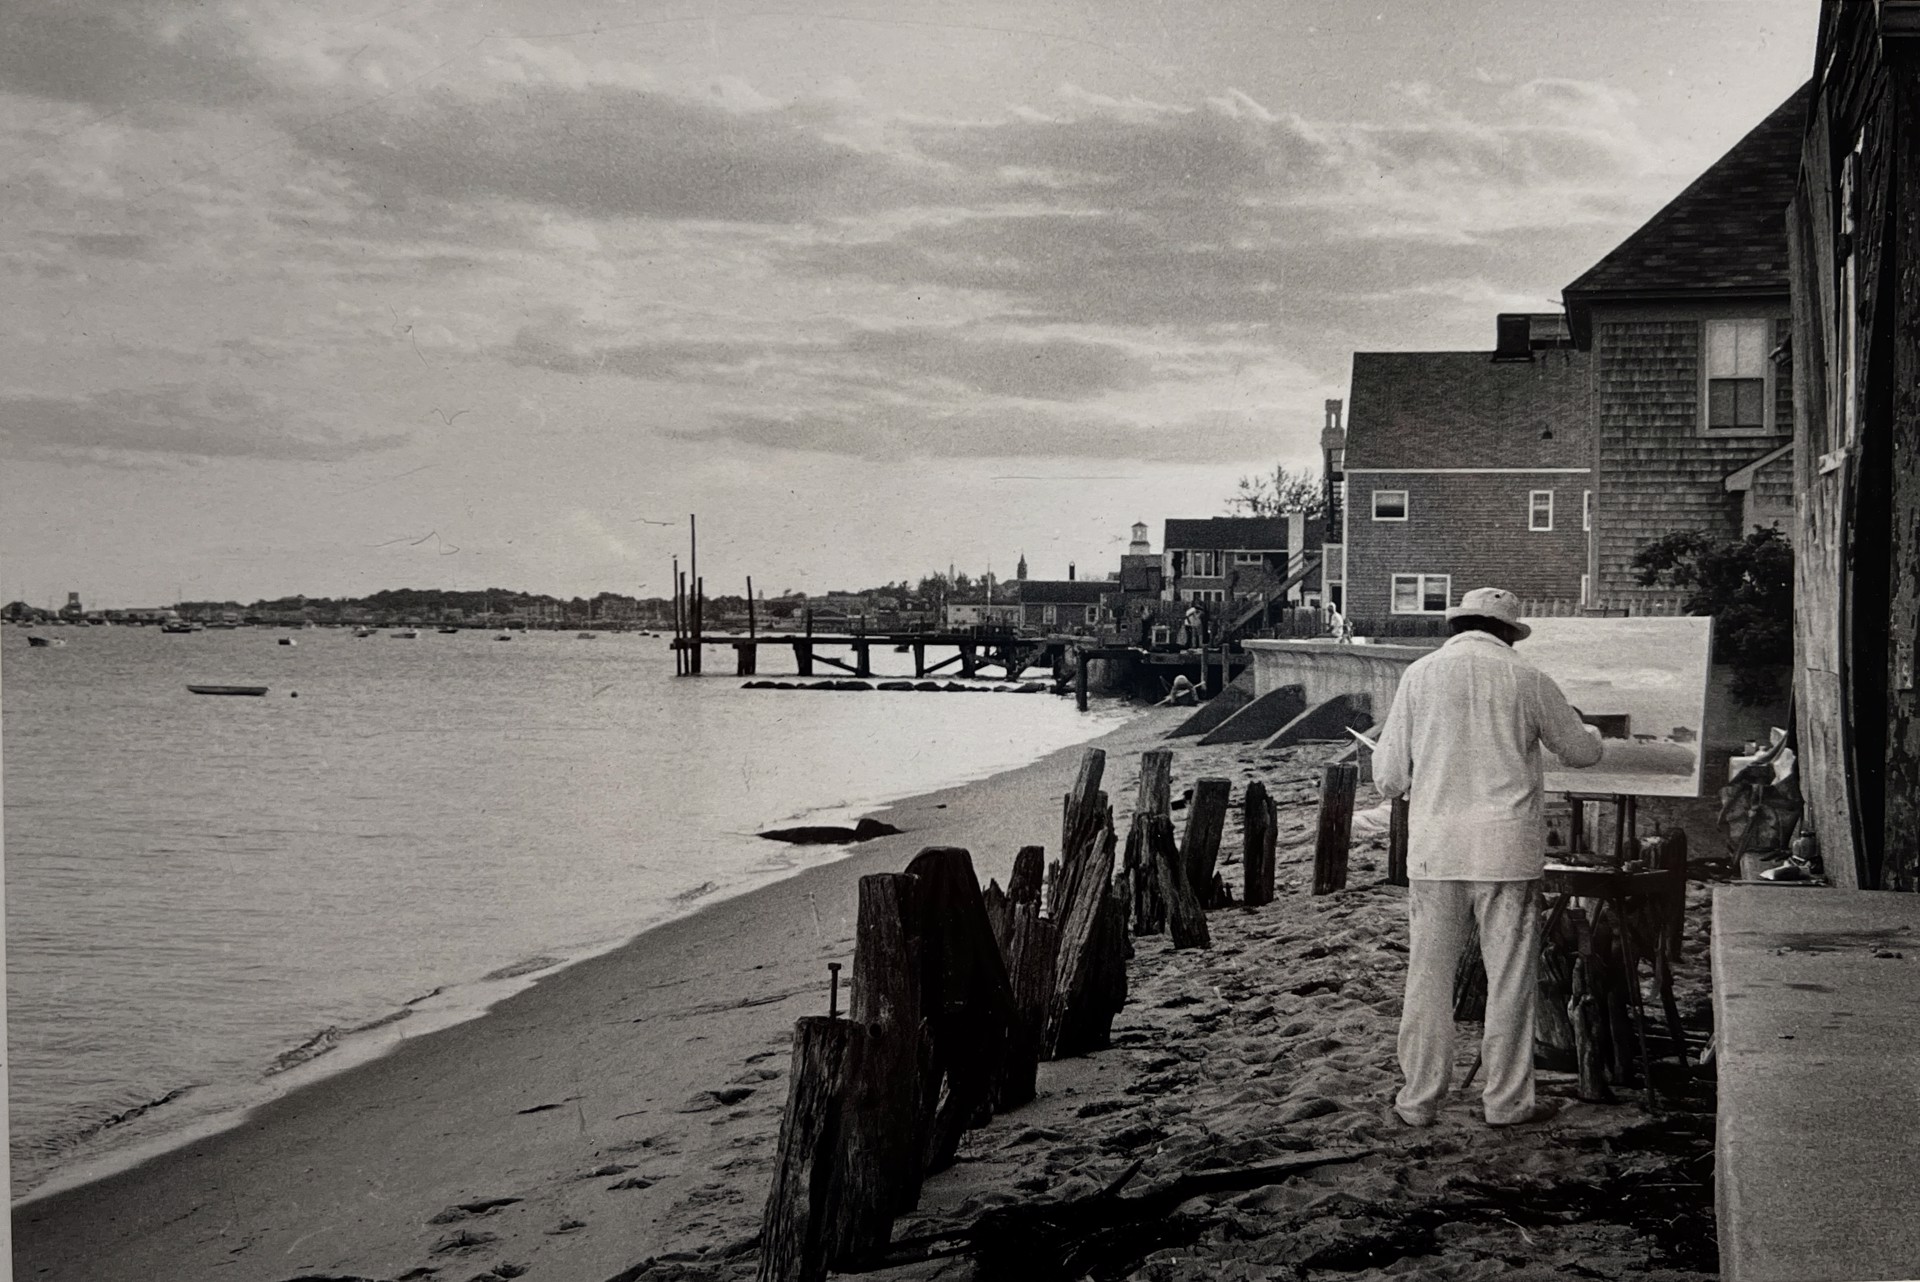 At the Motif, Provincetown, 1984 by Blair Resika